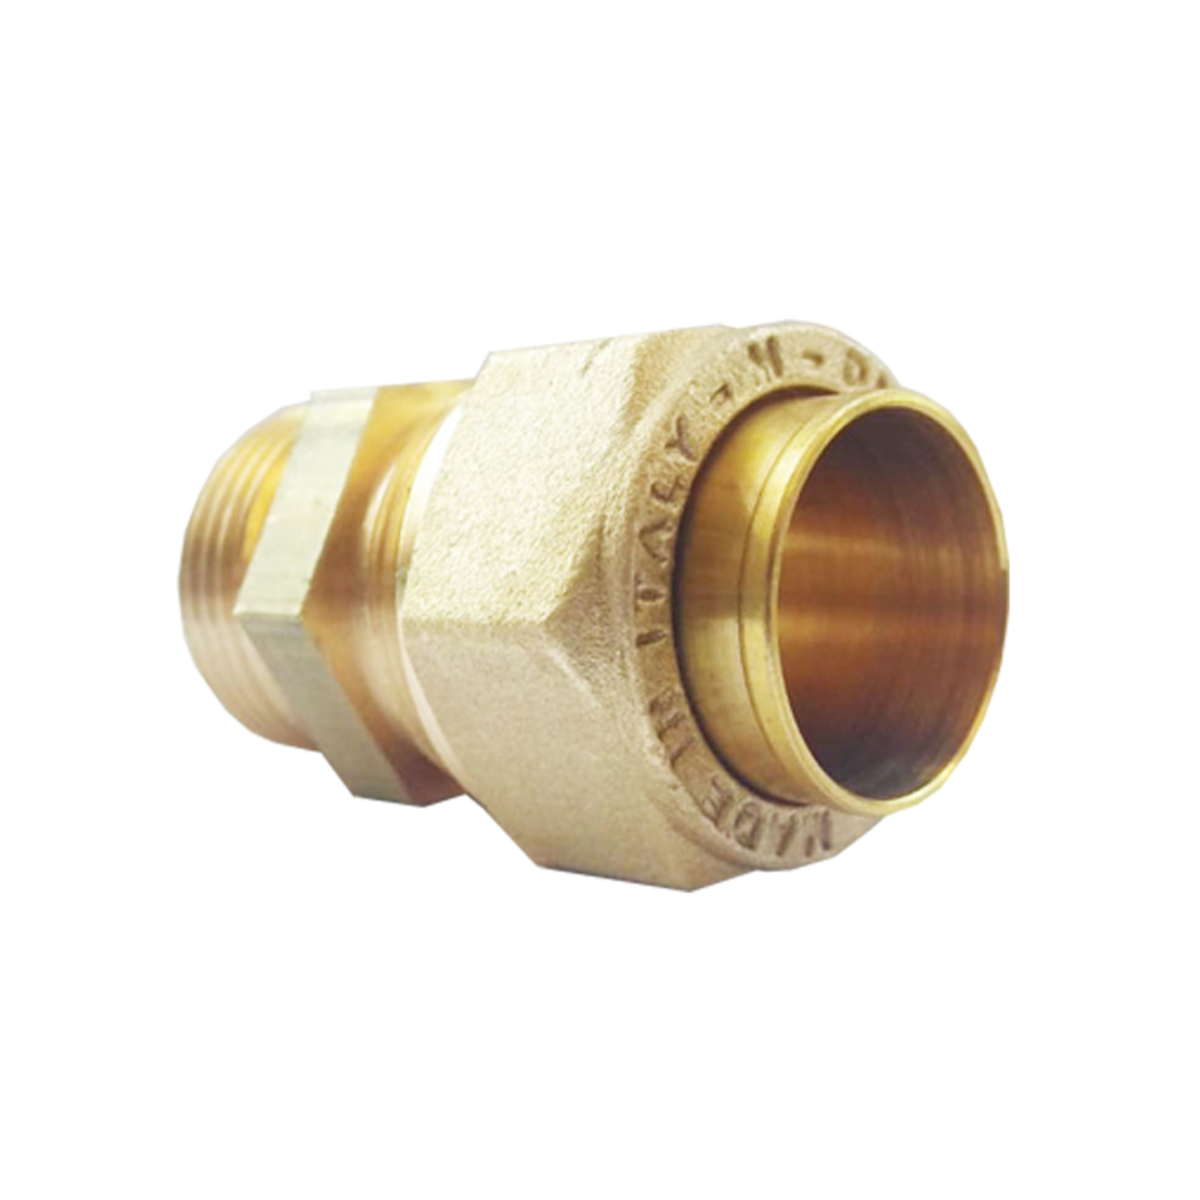 Austroflex Easy Tight FX push-in fitting Ø 16 threaded connection 3/4 M